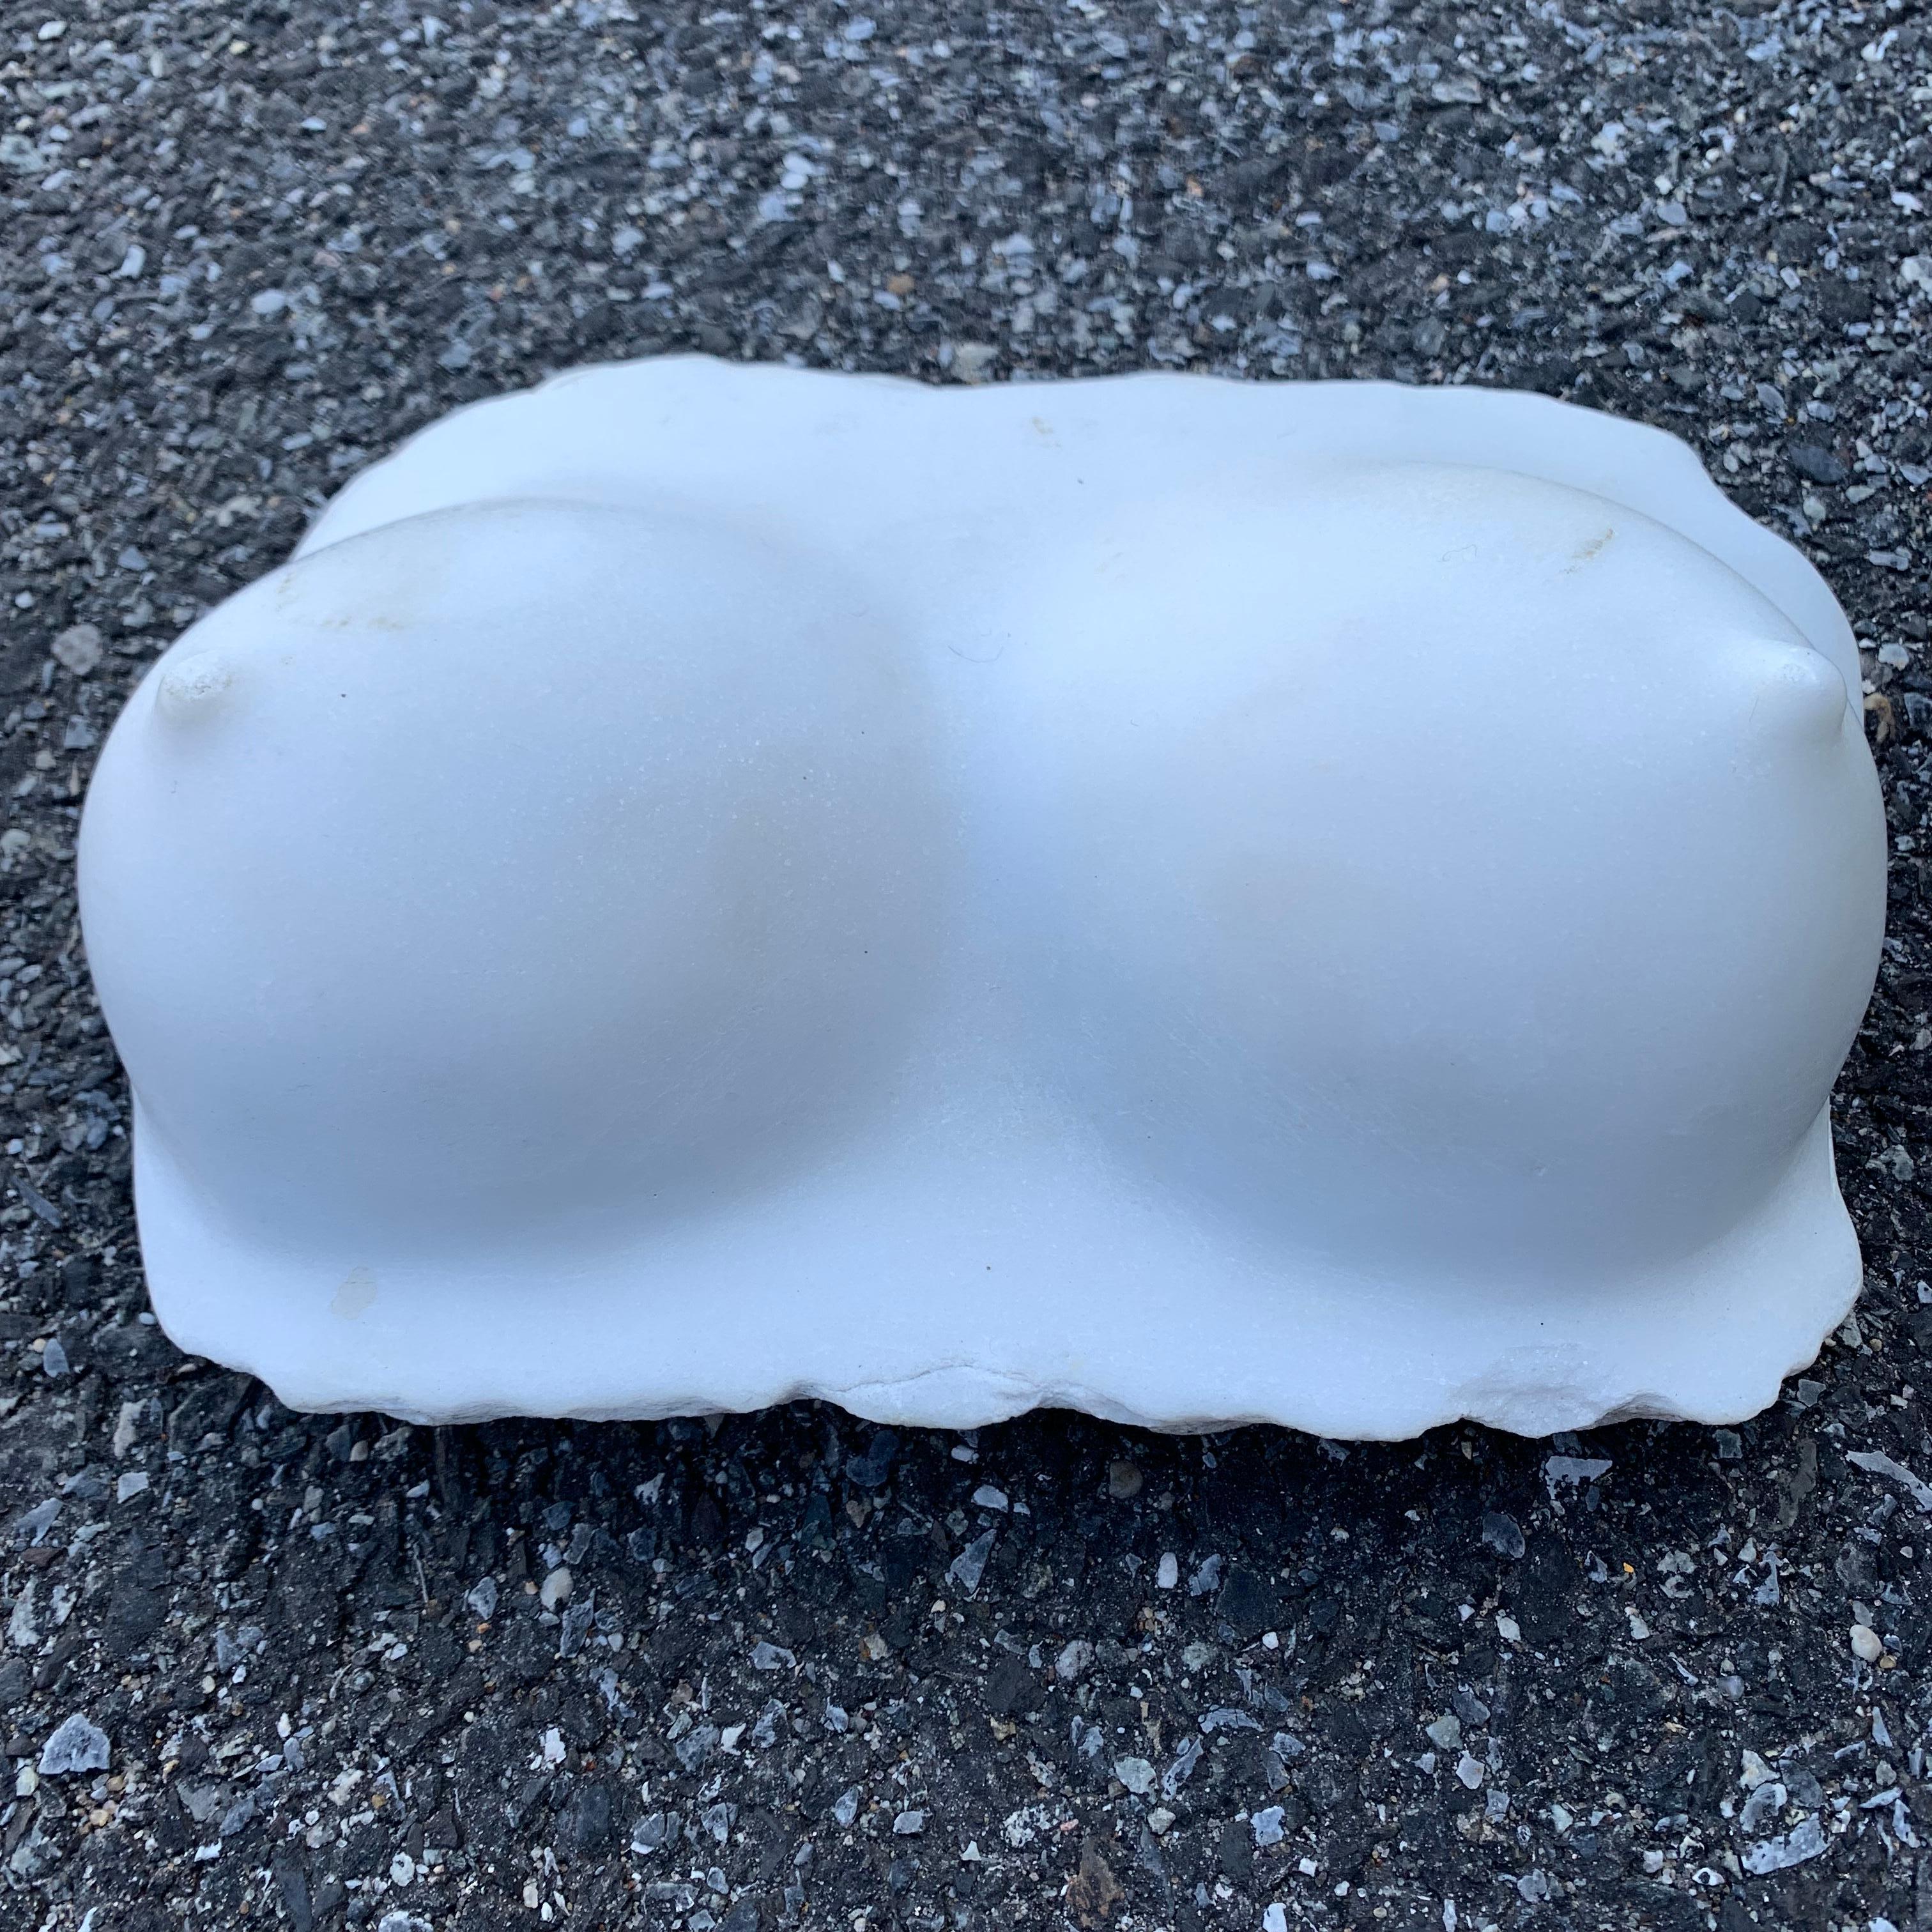 19th Century Marble Fragment Sculpture of Bosoms 2